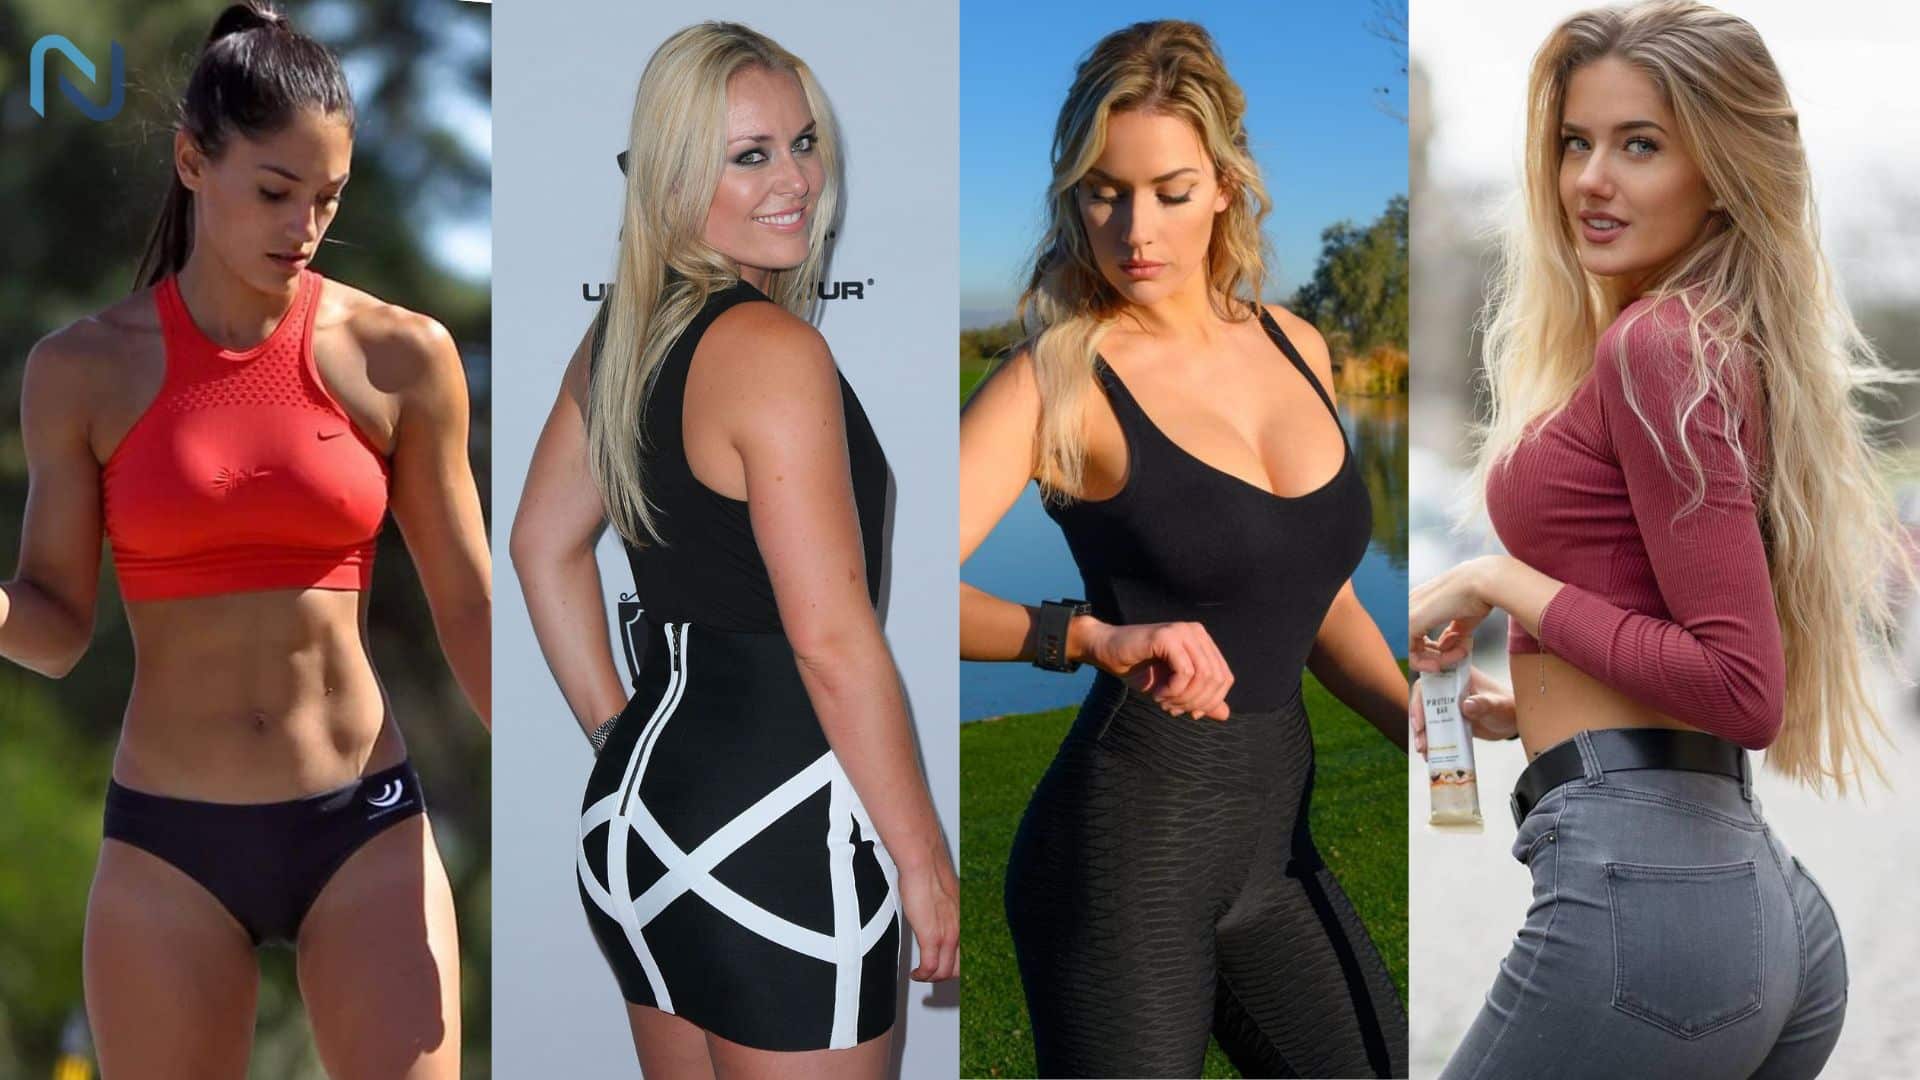 Here Are Some Top Hottest Female Athletes the World